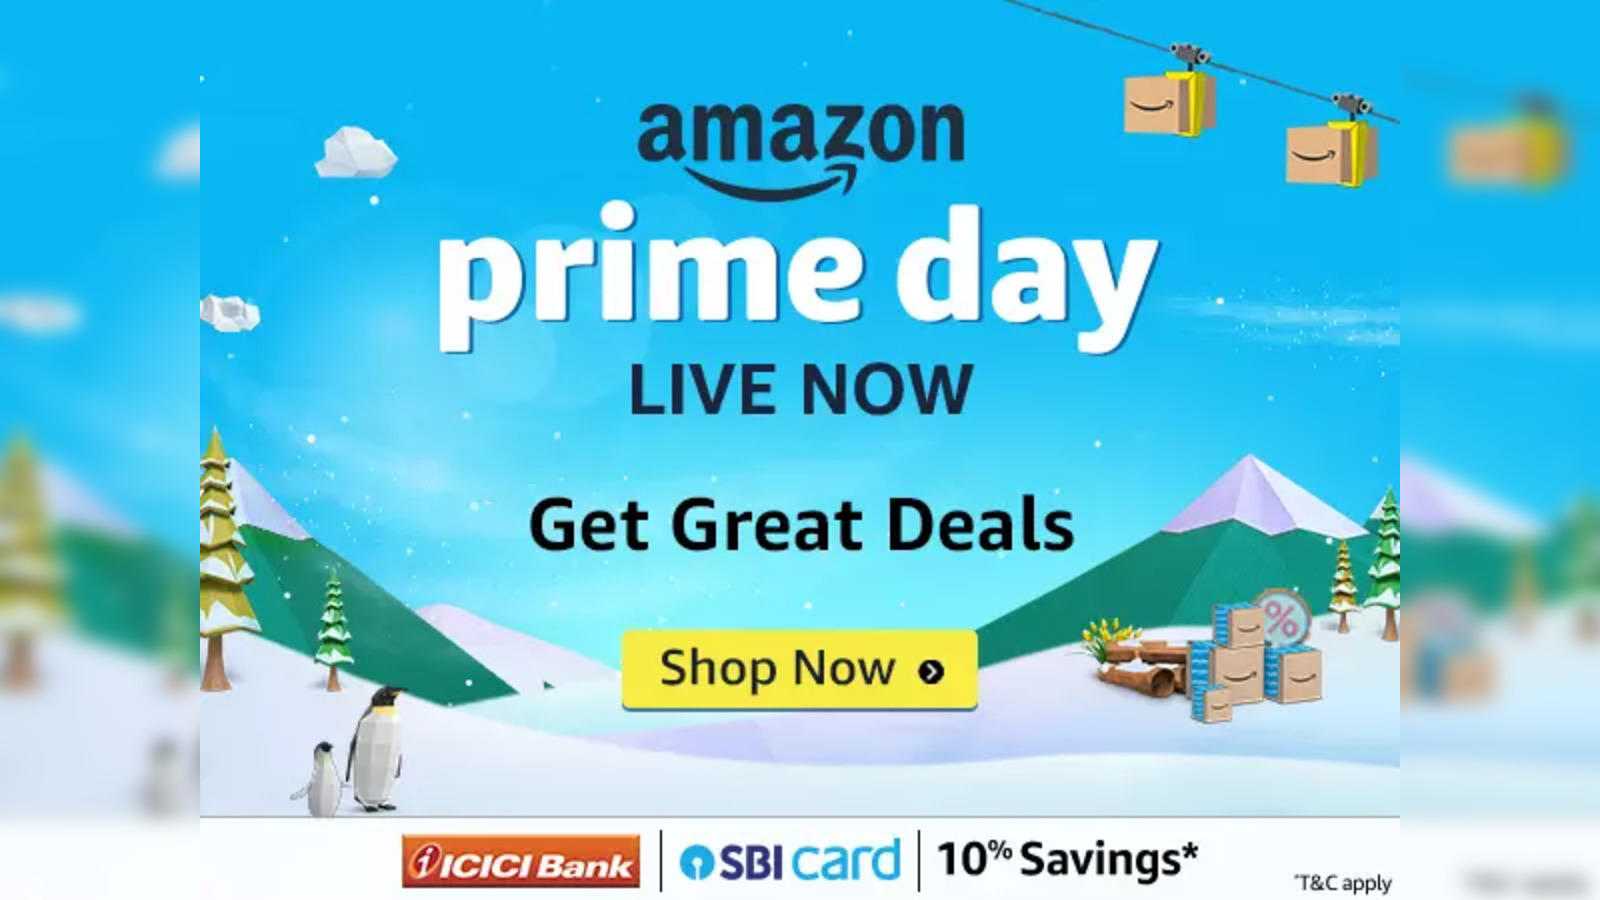 Prime Day, Brands of the World™